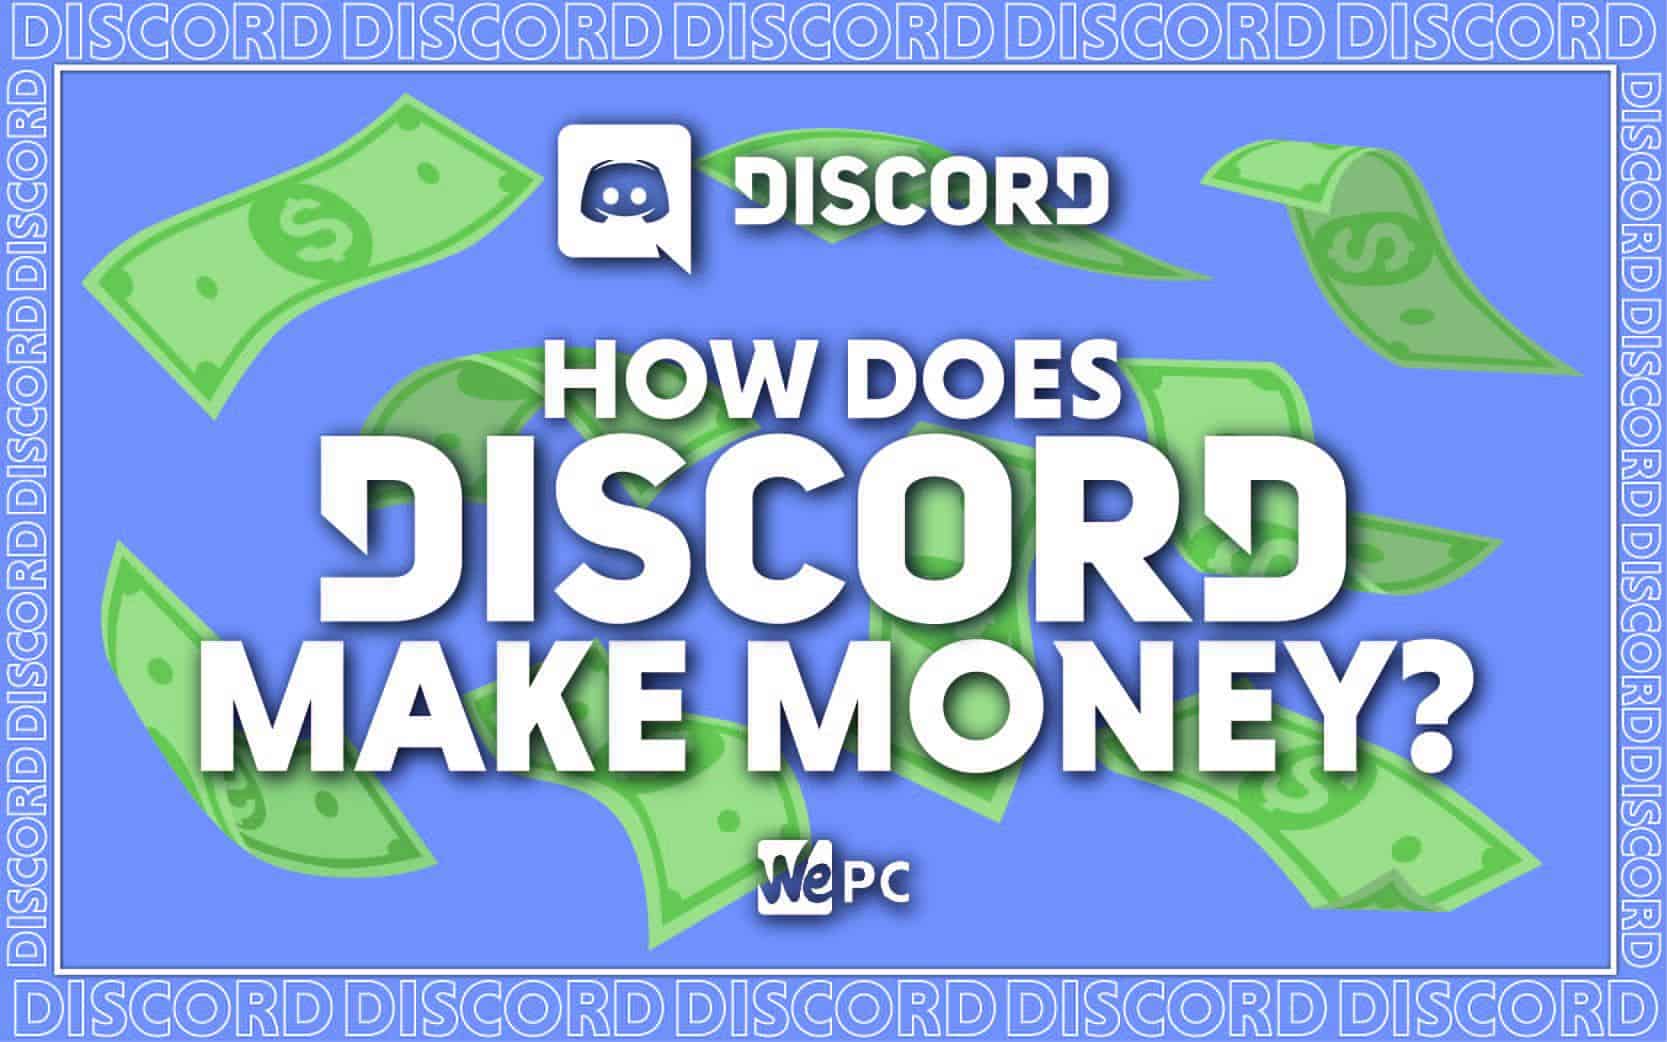 HOW DOES DISCORD MAKE MONEY